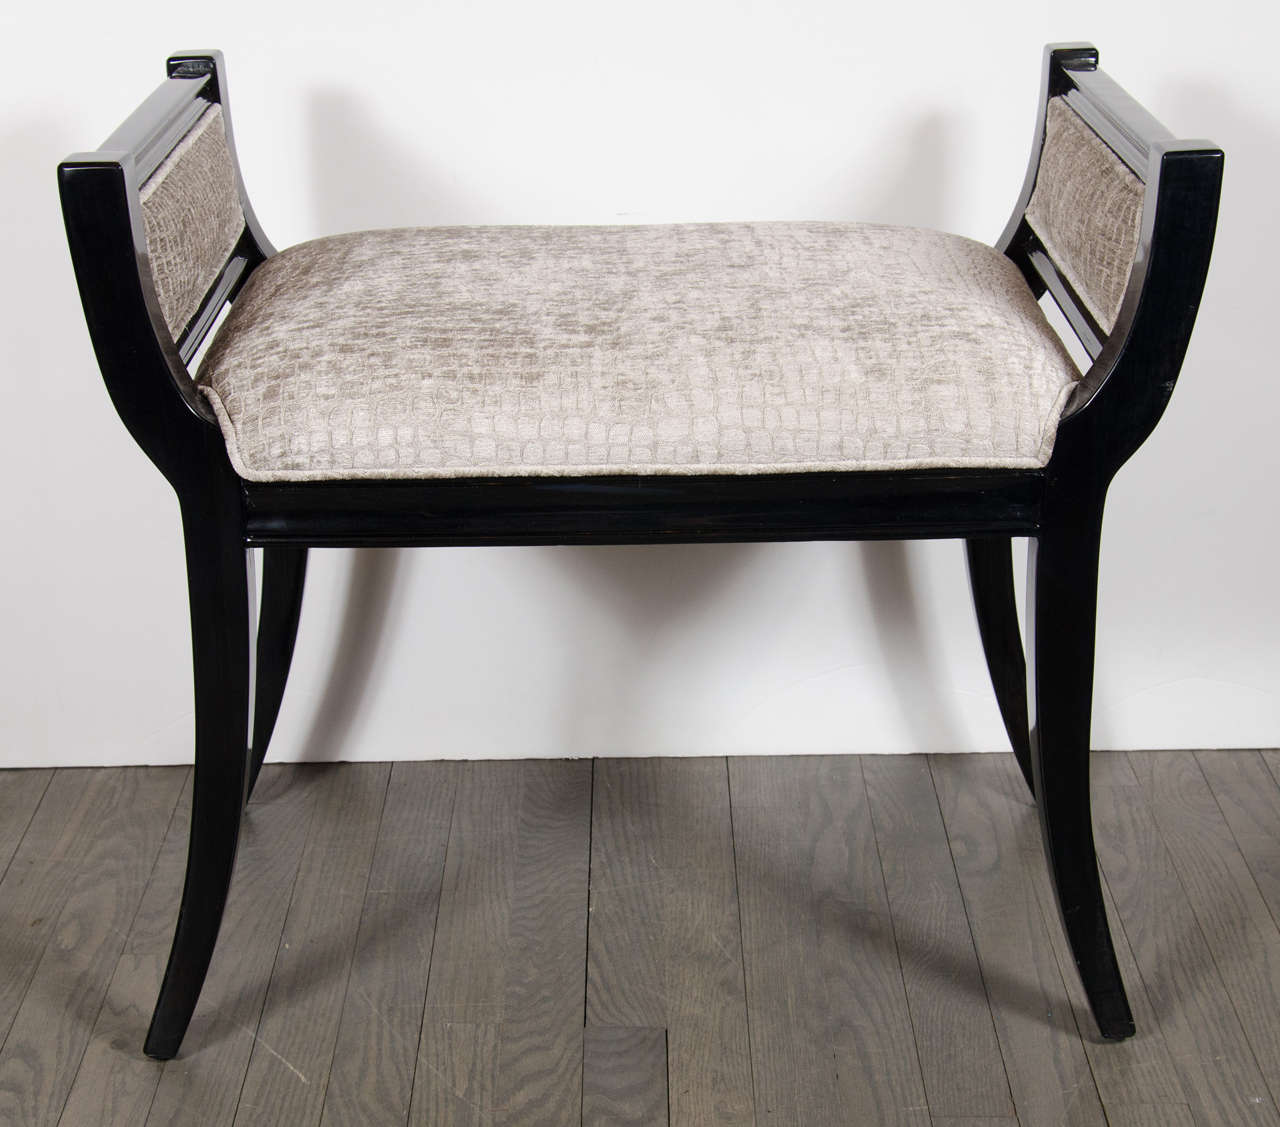 This stunning Mid-Century Modernist scroll form bench features ebonized walnut and gauffraged smoked topaz crocodile velvet. It's ultra chic design and simplicity would look beautiful in any room. It has been newly upholstered and mint restored.